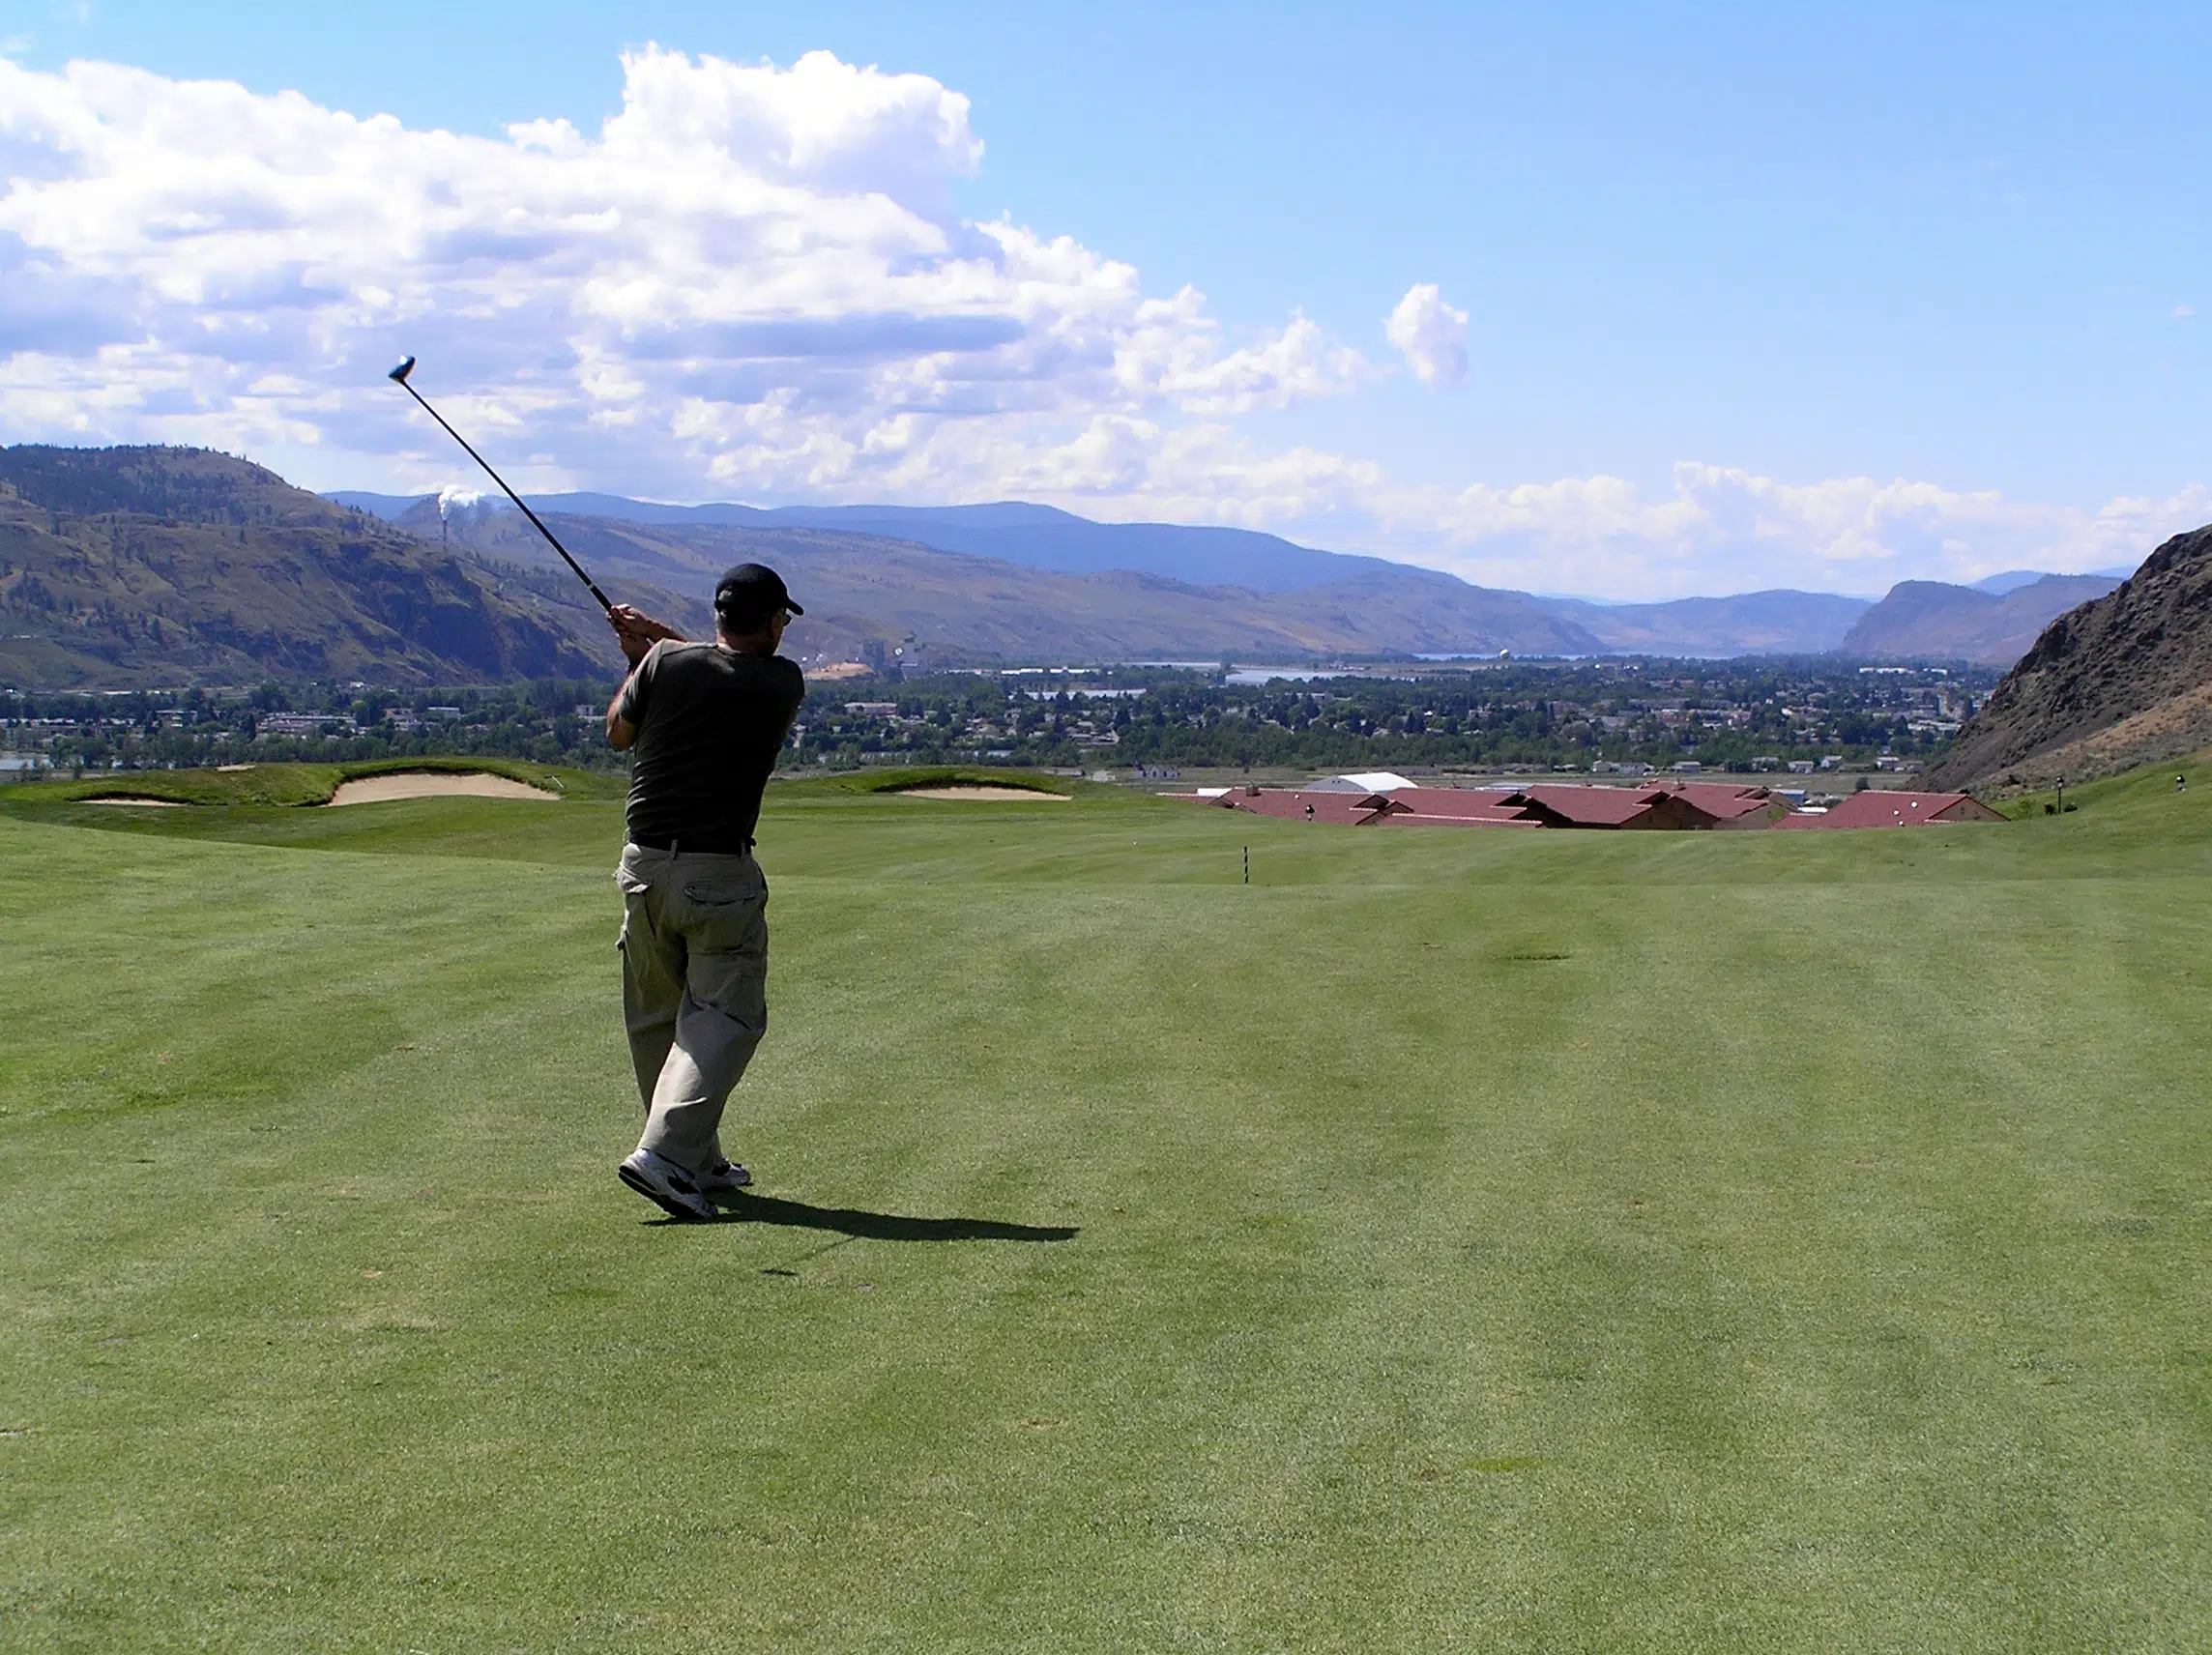 Many golf courses remain open in Kamloops despite pandemic